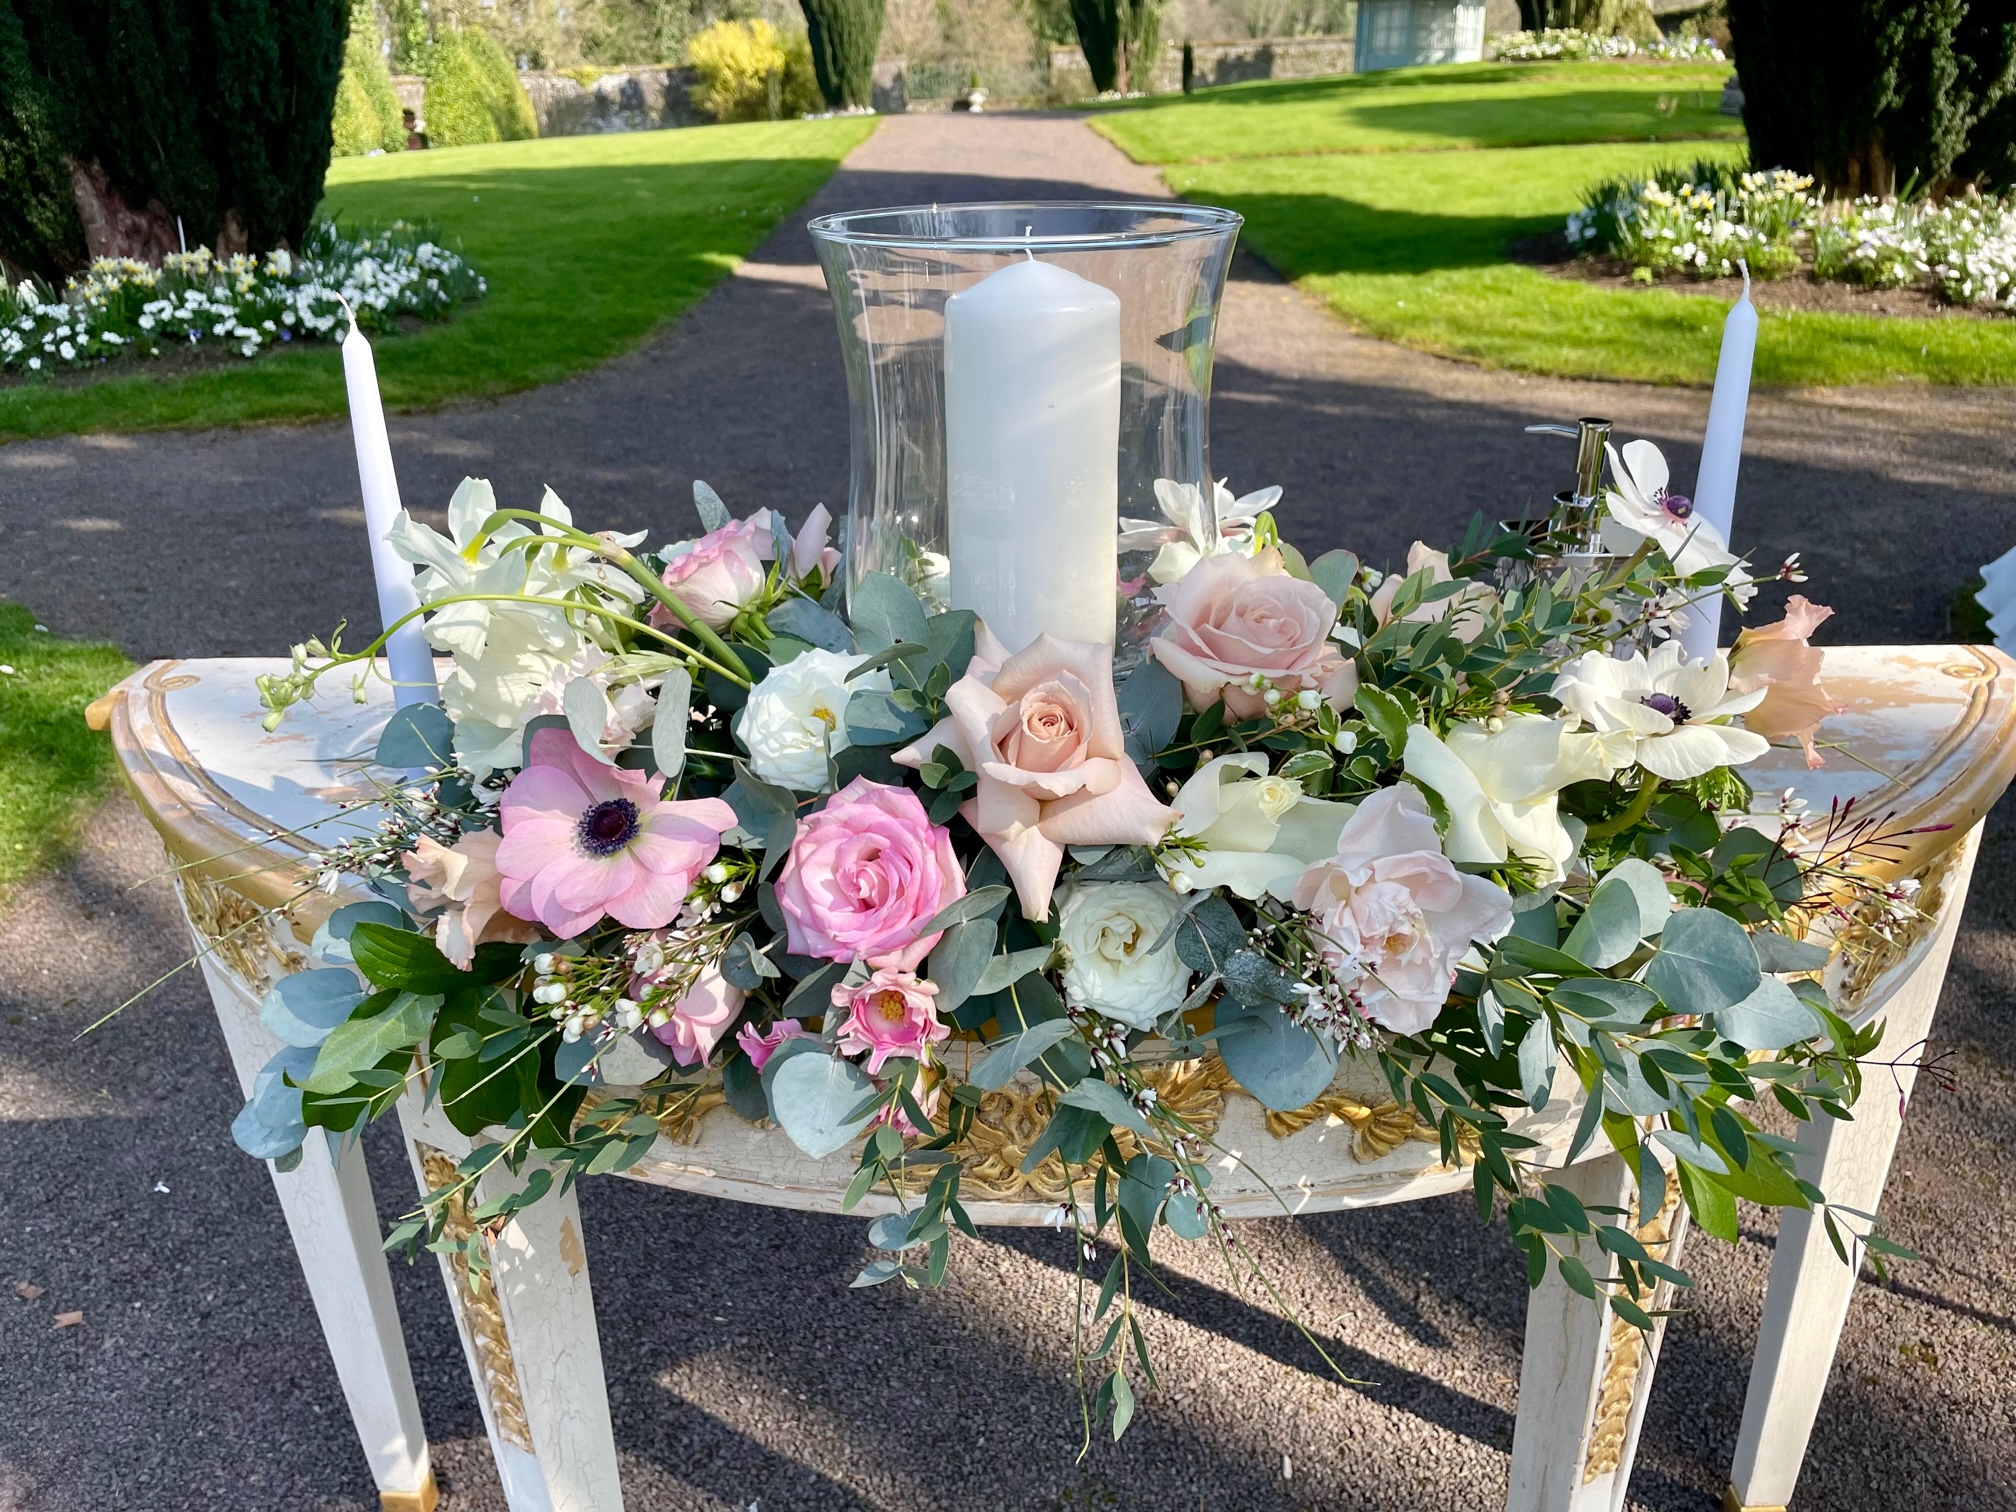 Unity candle ritual at outdoor wedding, Tankardstown, by Caroline McCarthy Celebrant & Registered Celebrant Ireland - Cork Kerry Tipperary Limerick Kildare and more